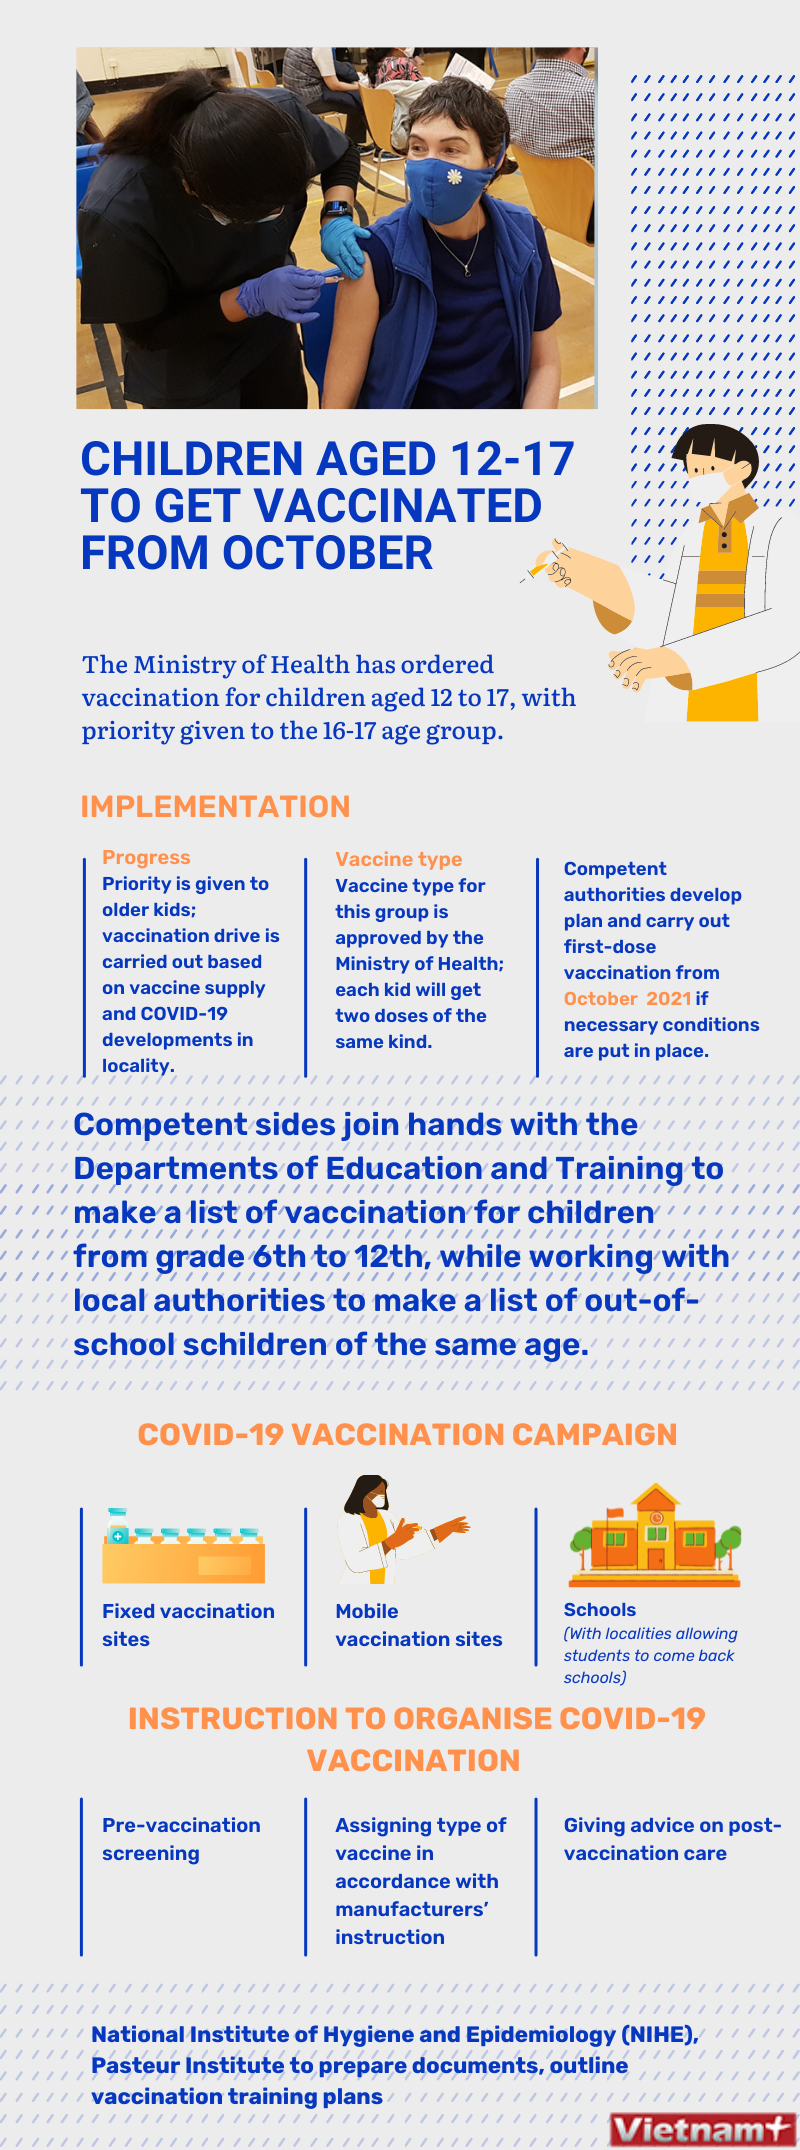 Children aged 12-17 to get vaccinated from October hinh anh 1